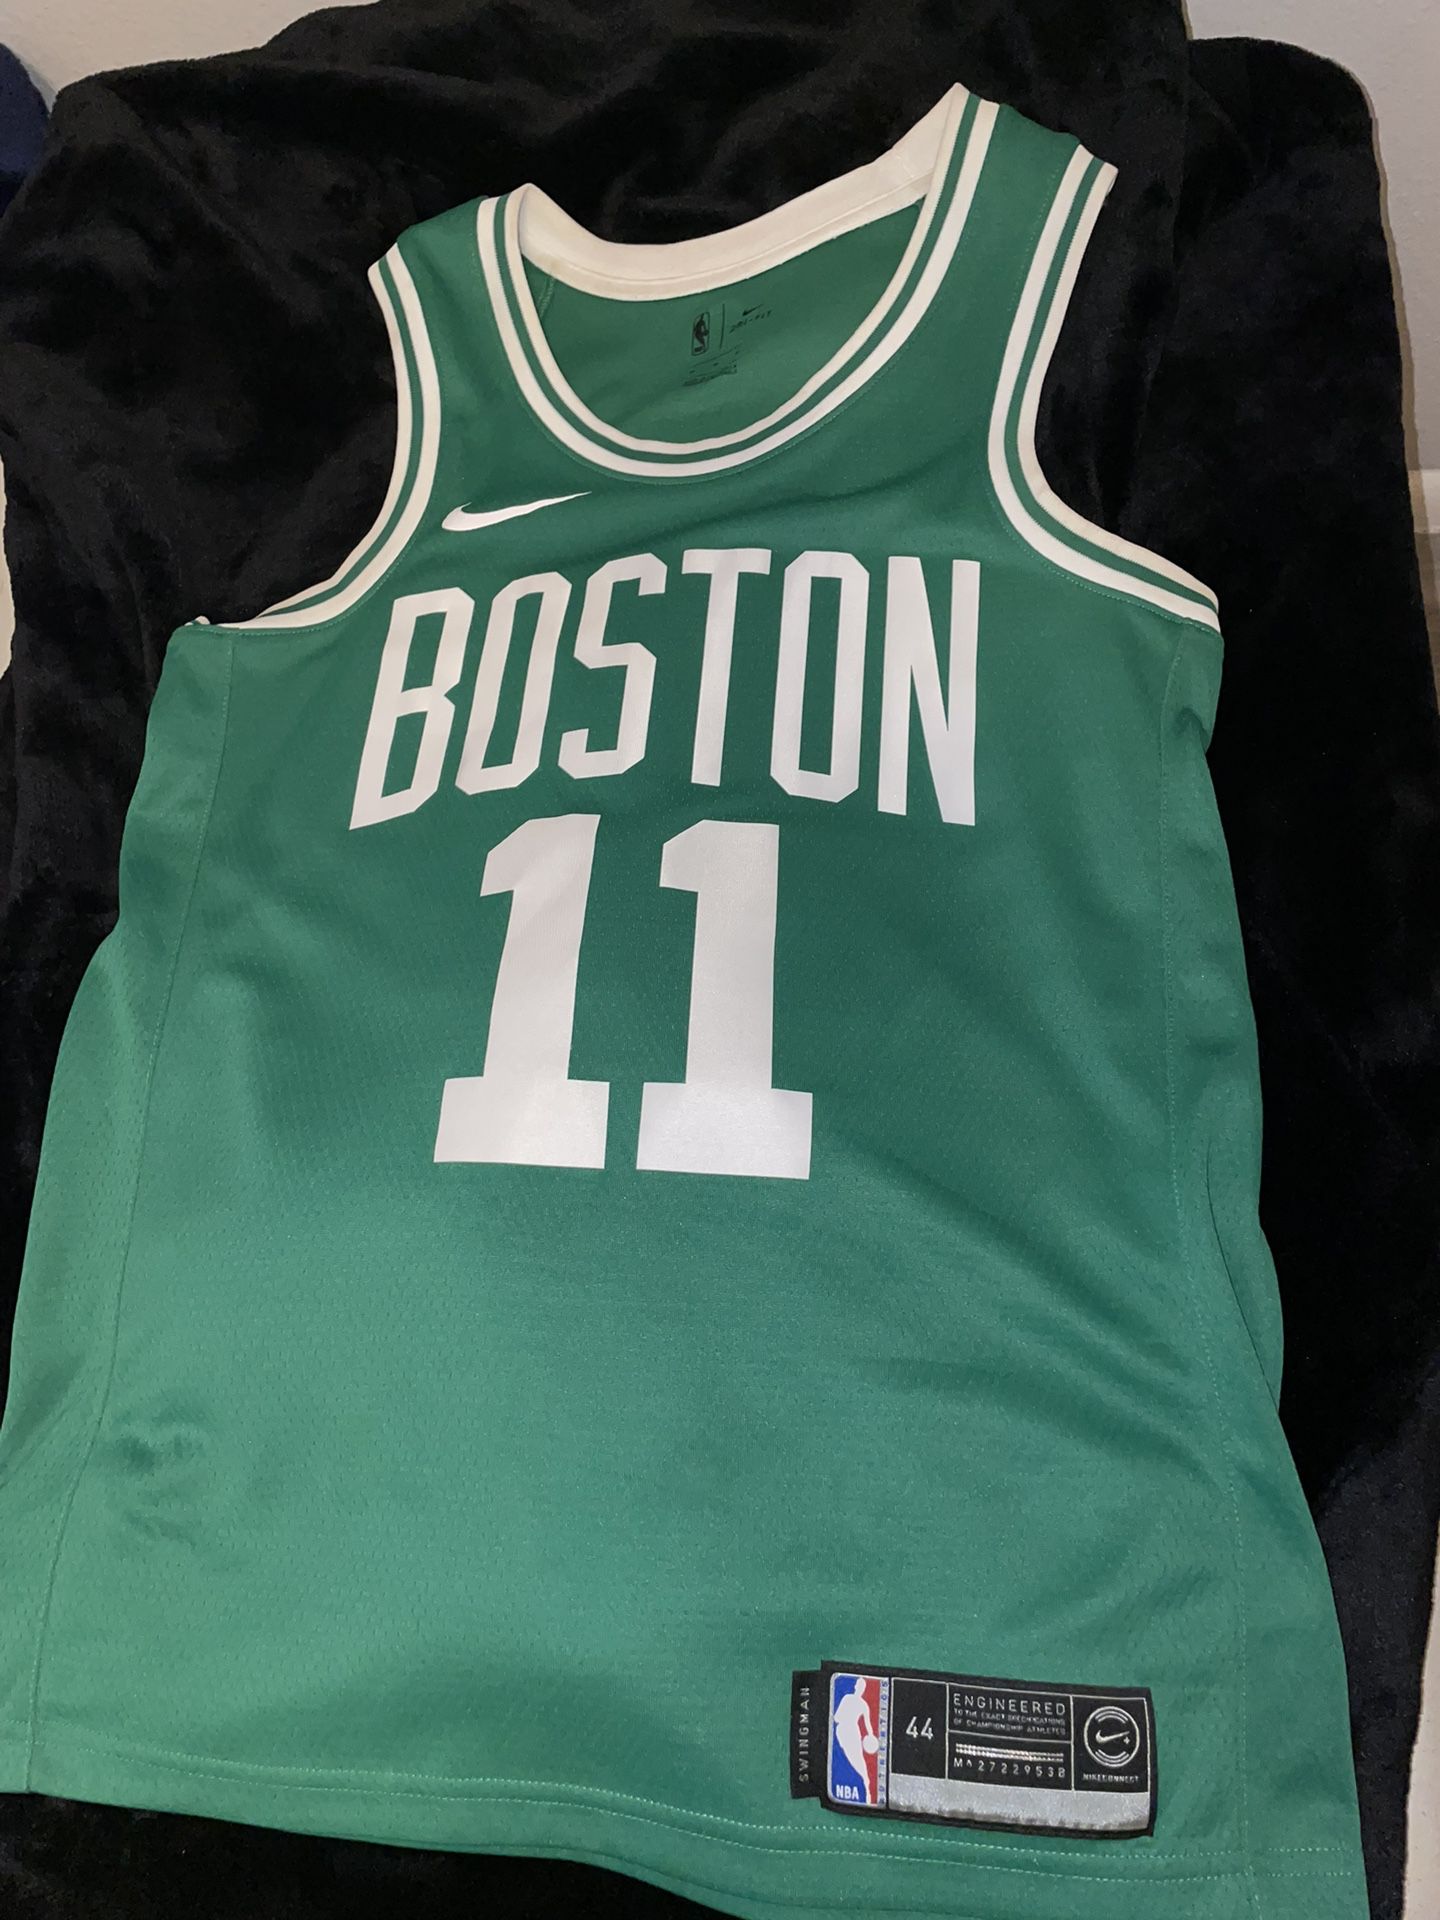 New Authentic Kyrie Irving Celtics jersey